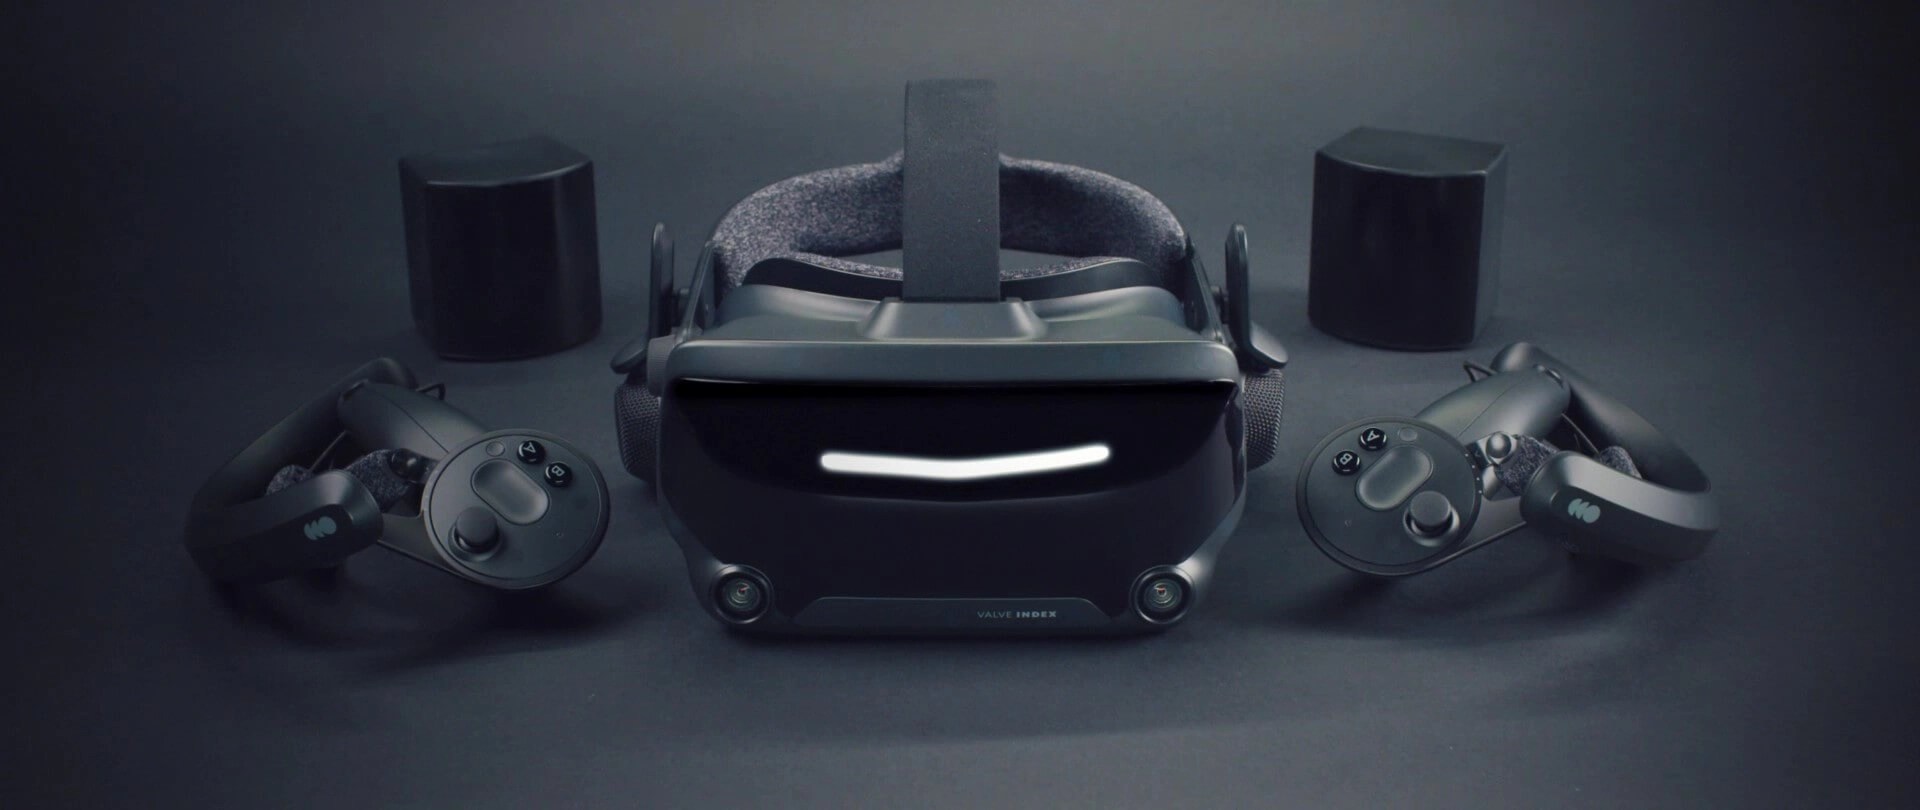 Valve Index Review: Everything You Need To Know